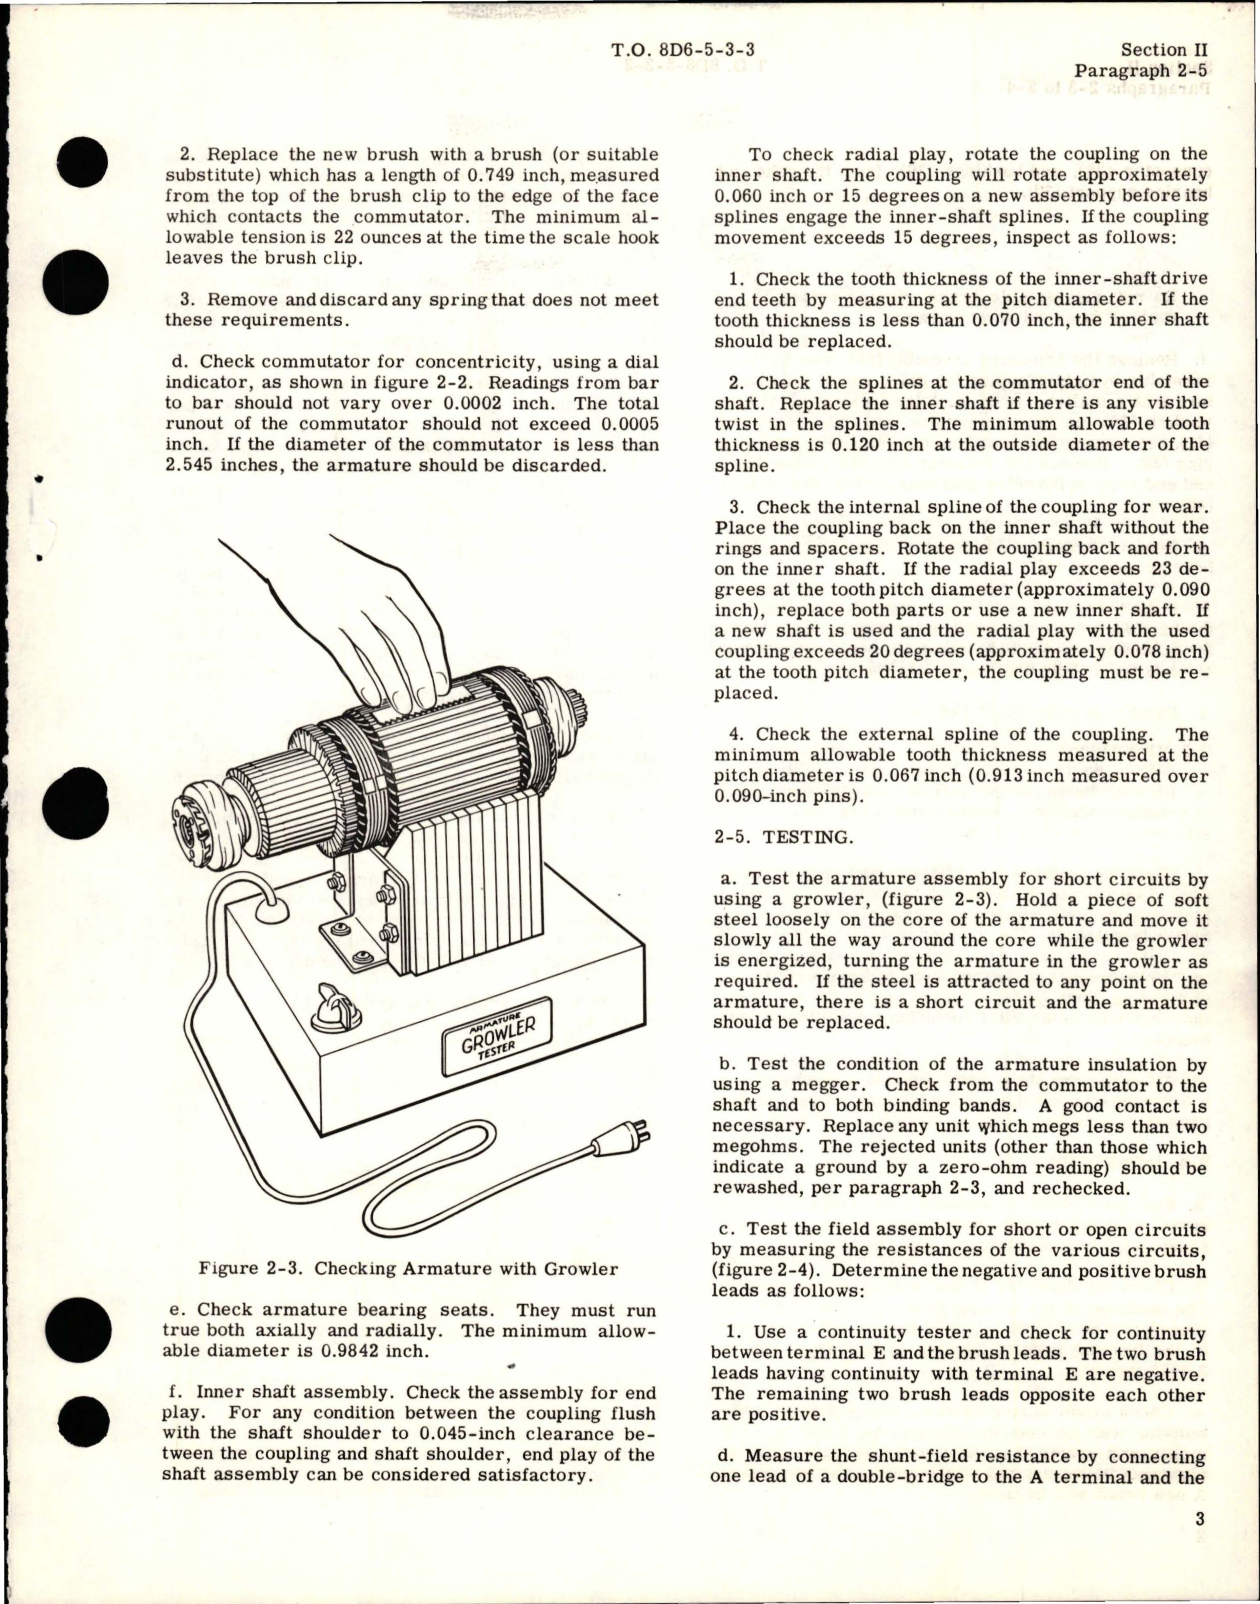 Sample page 9 from AirCorps Library document: Overhaul Instructions for Engine Driven Generator - Models 2CM75C10A, 2CM75C10B, and 2CM75C10BT 